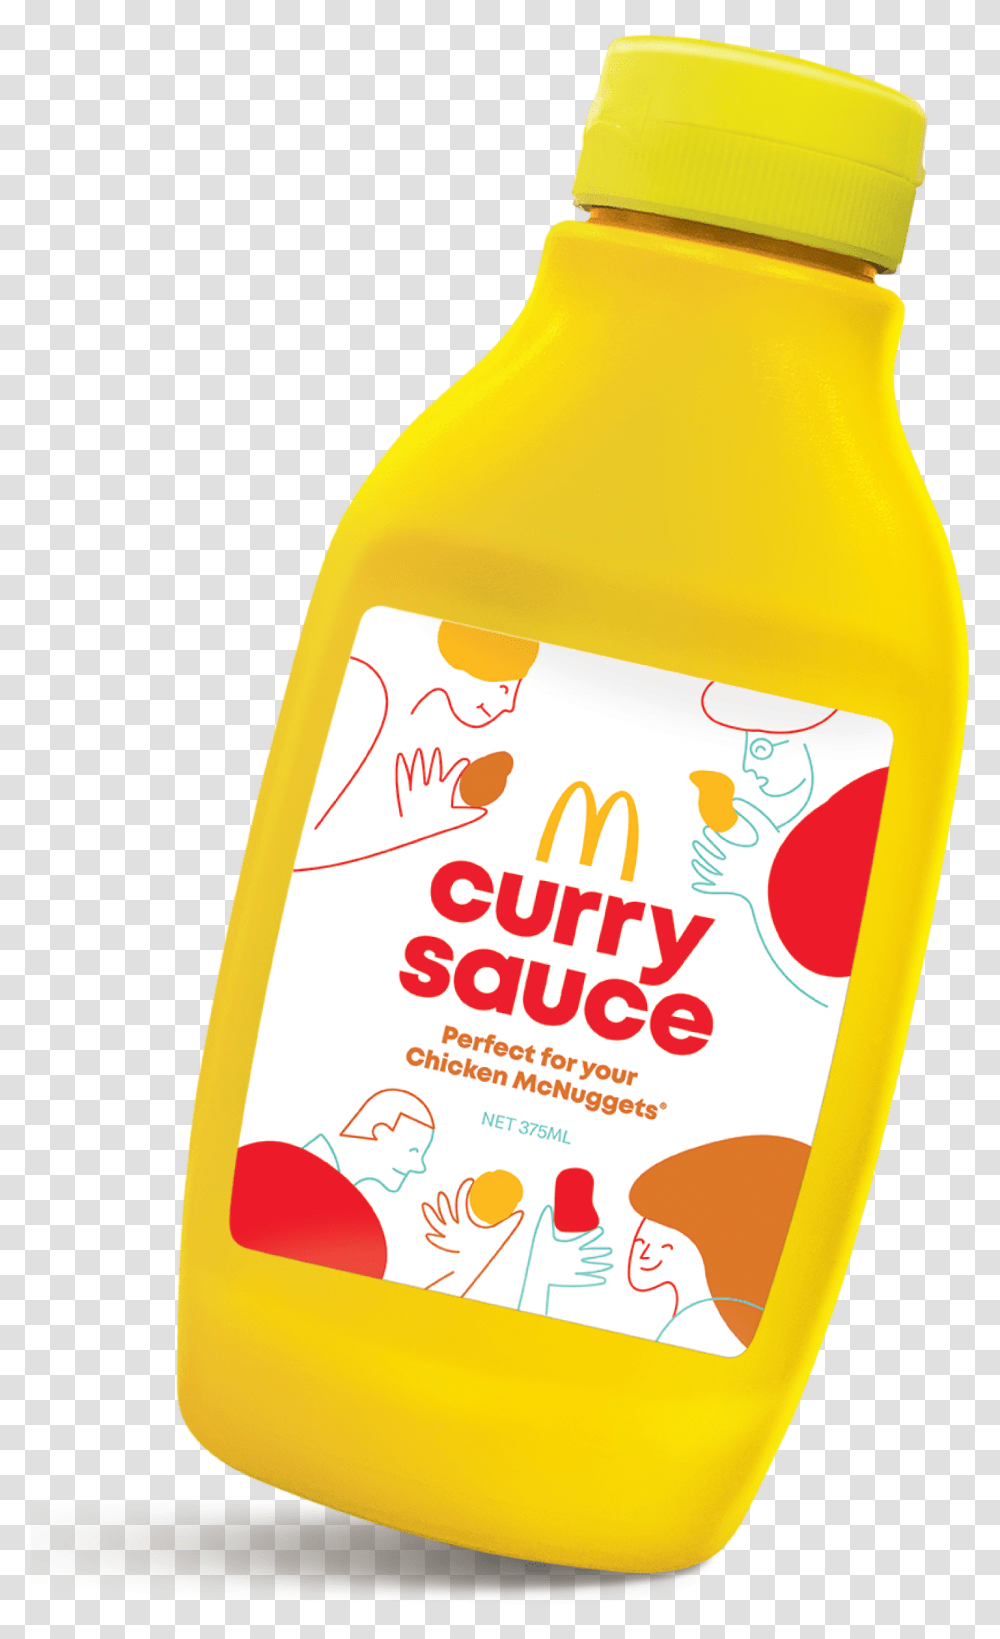 Mcdonald's Curry Sauce Bottle Data Spicy Nuggets Curry Sauce Bottle Singapore, Label, Juice, Beverage Transparent Png